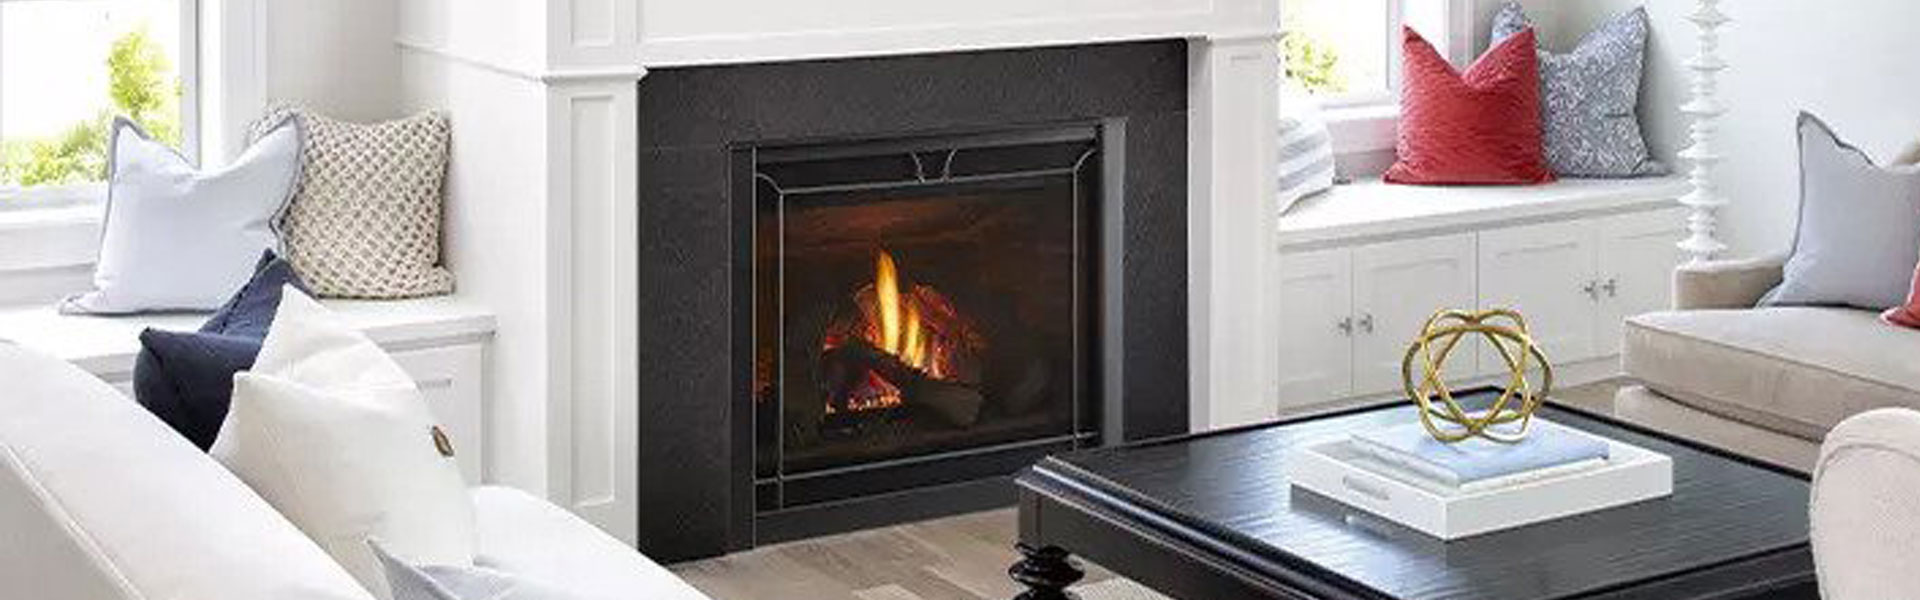 Deciphering Common Fireplace Terms